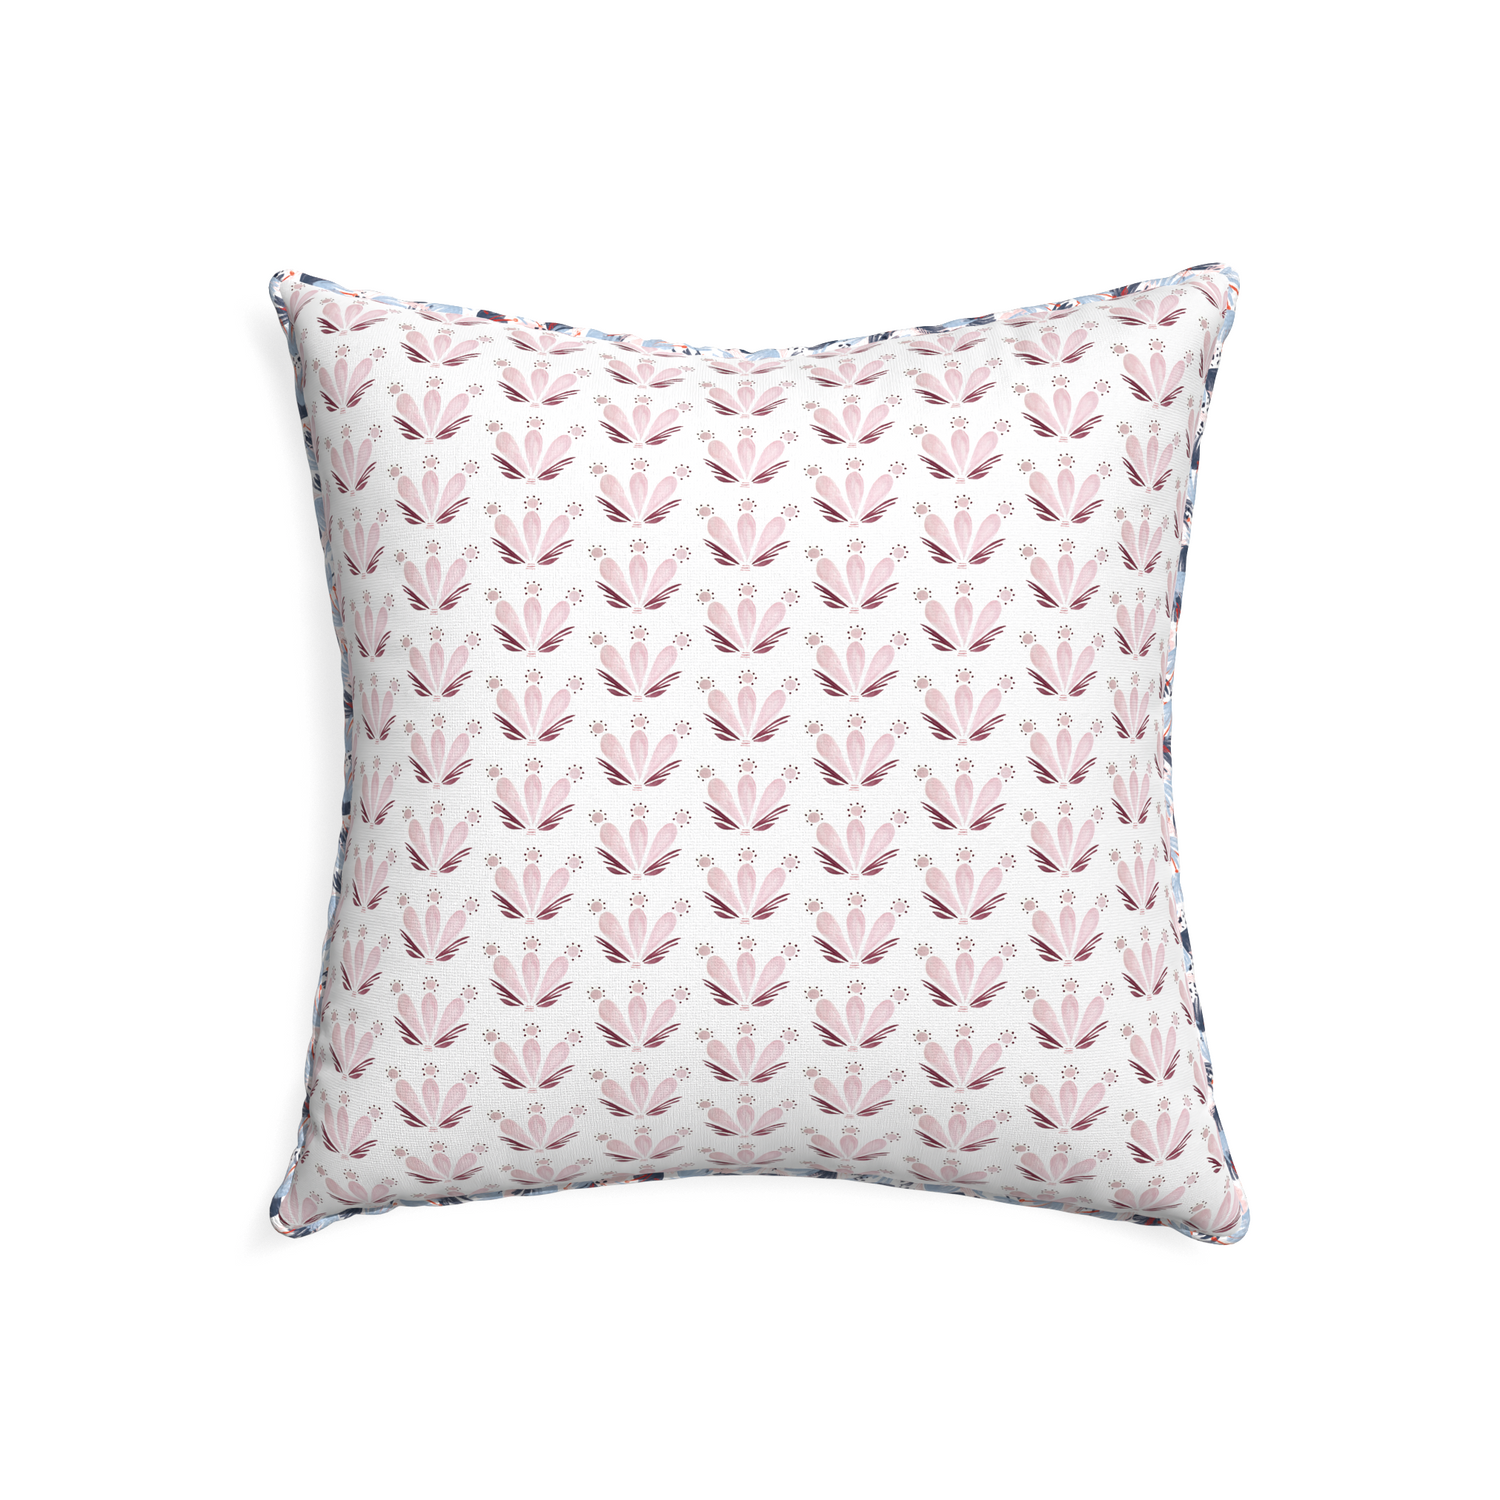 22-square serena pink custom pink & burgundy drop repeat floralpillow with e piping on white background